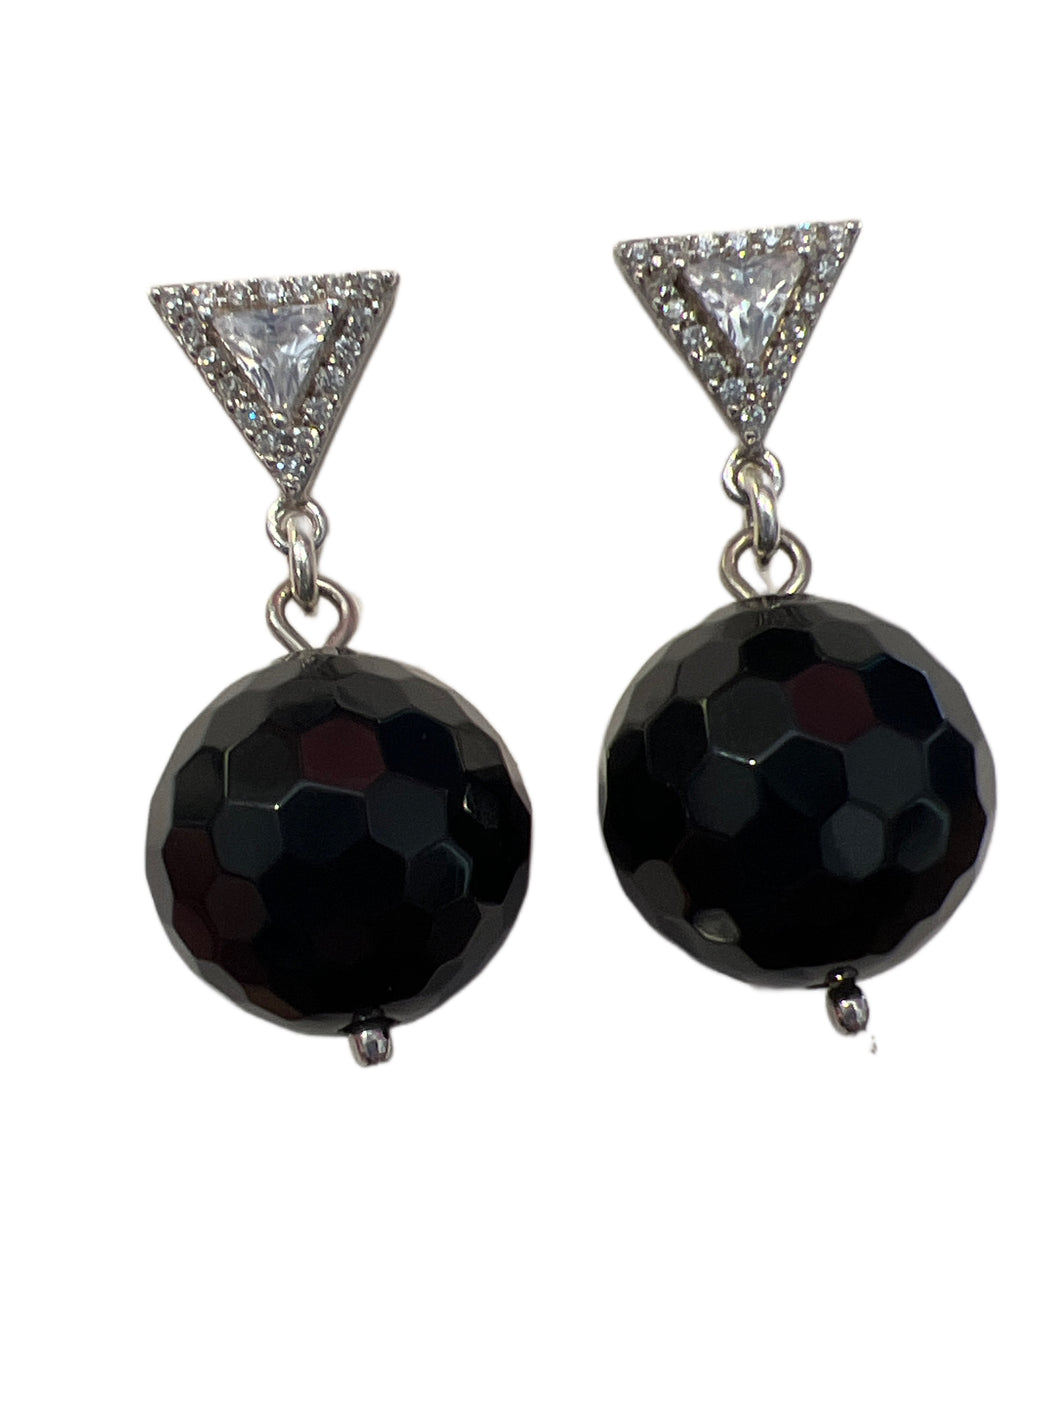 Onyx faceted Earrings with CZ Trillion Post